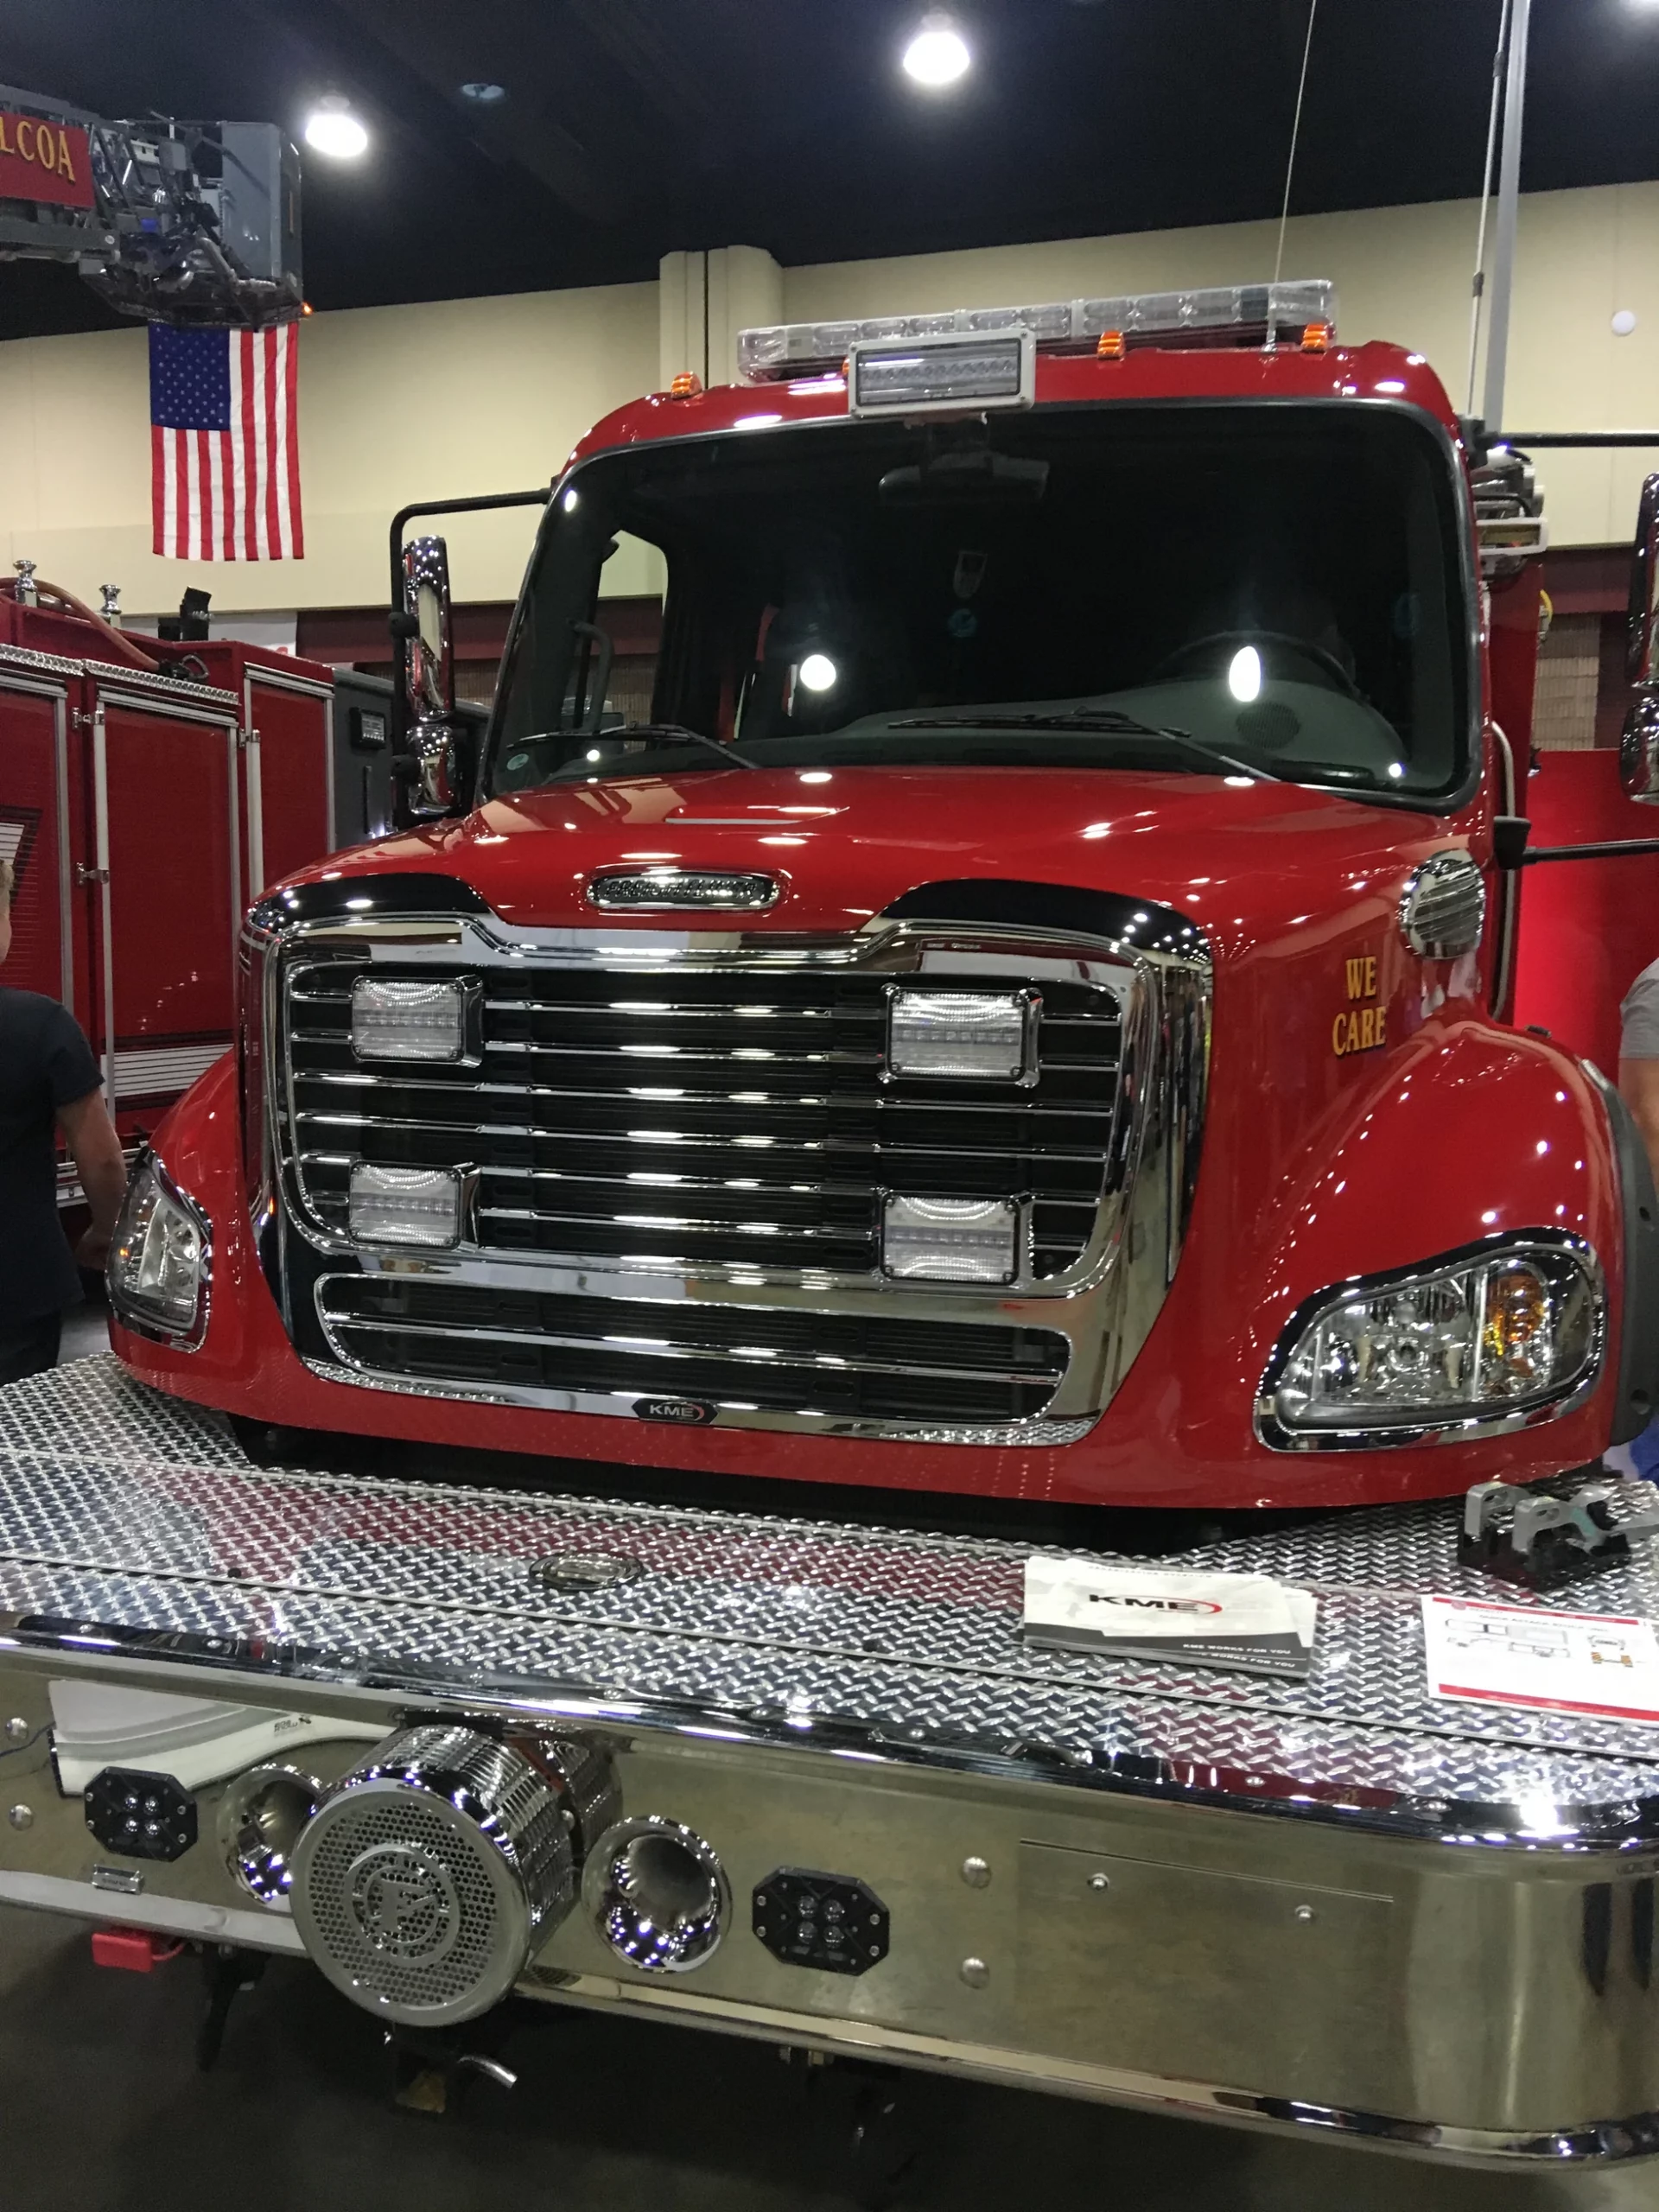 A firetruck is on display at the Smoky Mountain Fire/Rescue Expo.